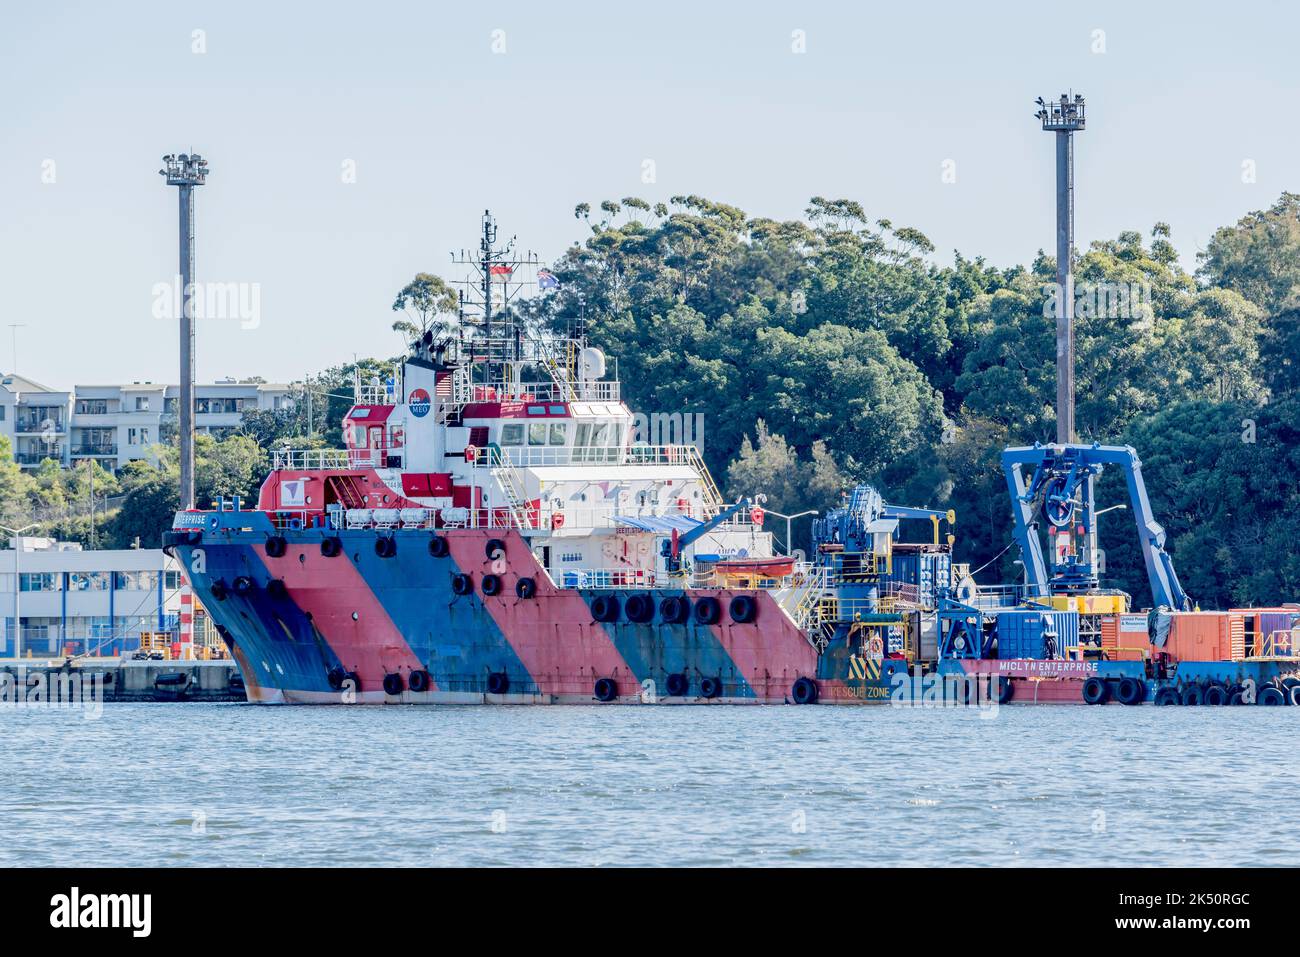 The 2007 built Miclyn Enterprise 70m offshore support vessel and tug or tugboat, moored in White Bay, Sydney Harbour, Australia Stock Photo